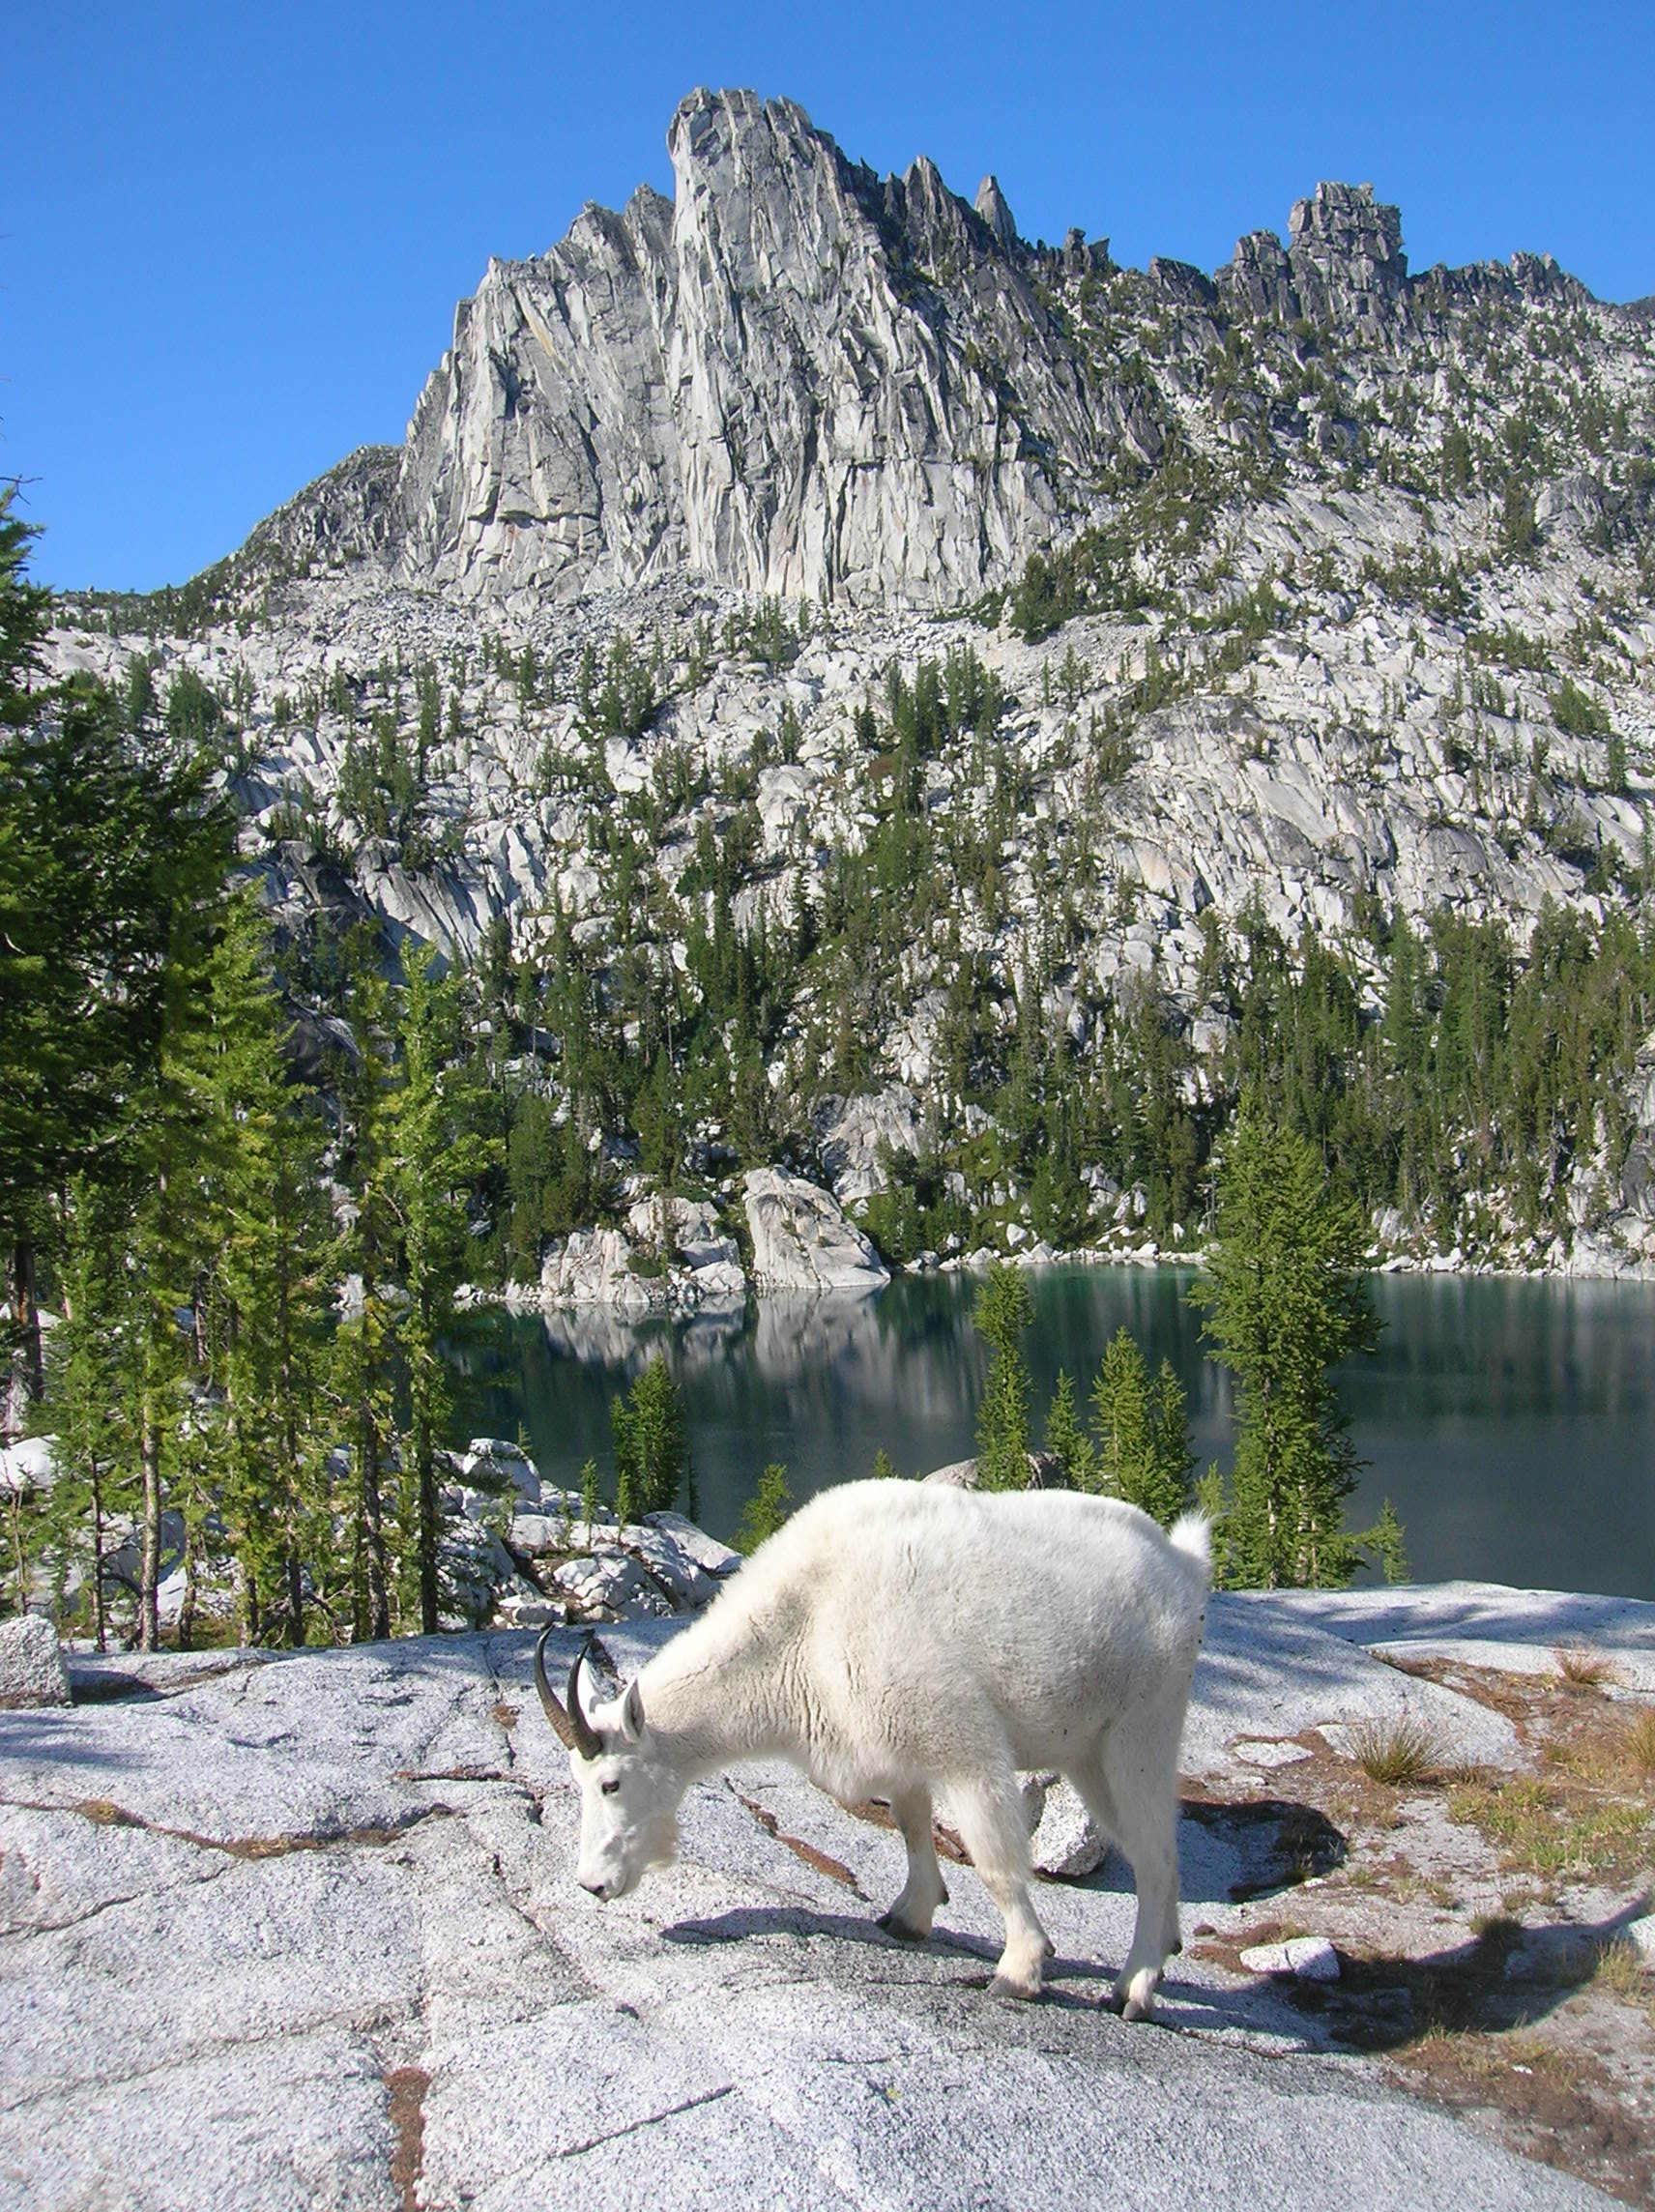 Mountain goat at Enchantment Lakes in Alpine Lakes Wilderness.